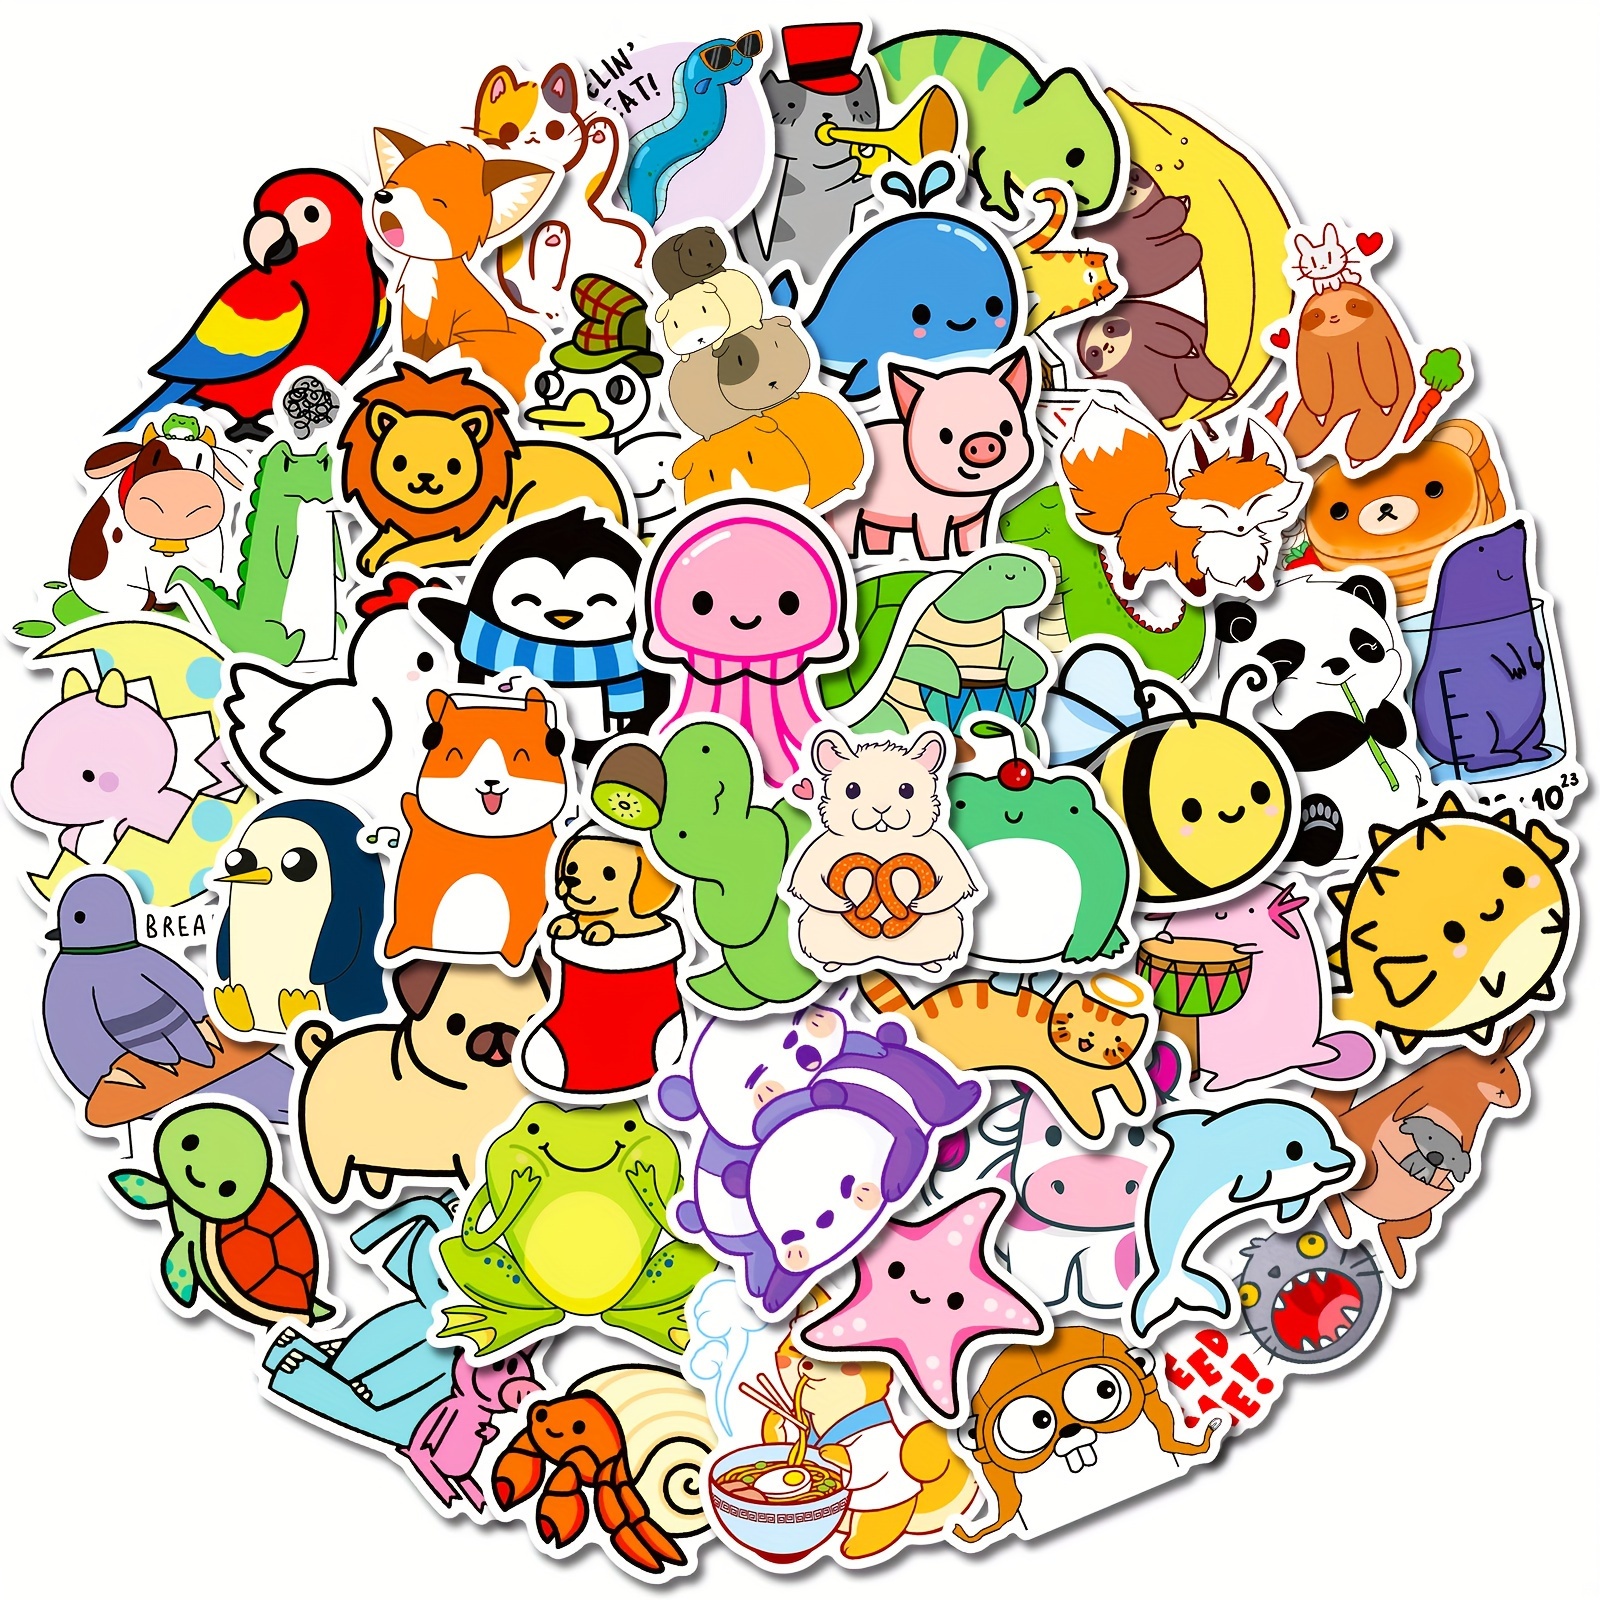 Pet Stickers holiday: 20pcs Kawaii Stickers for Journaling Cute